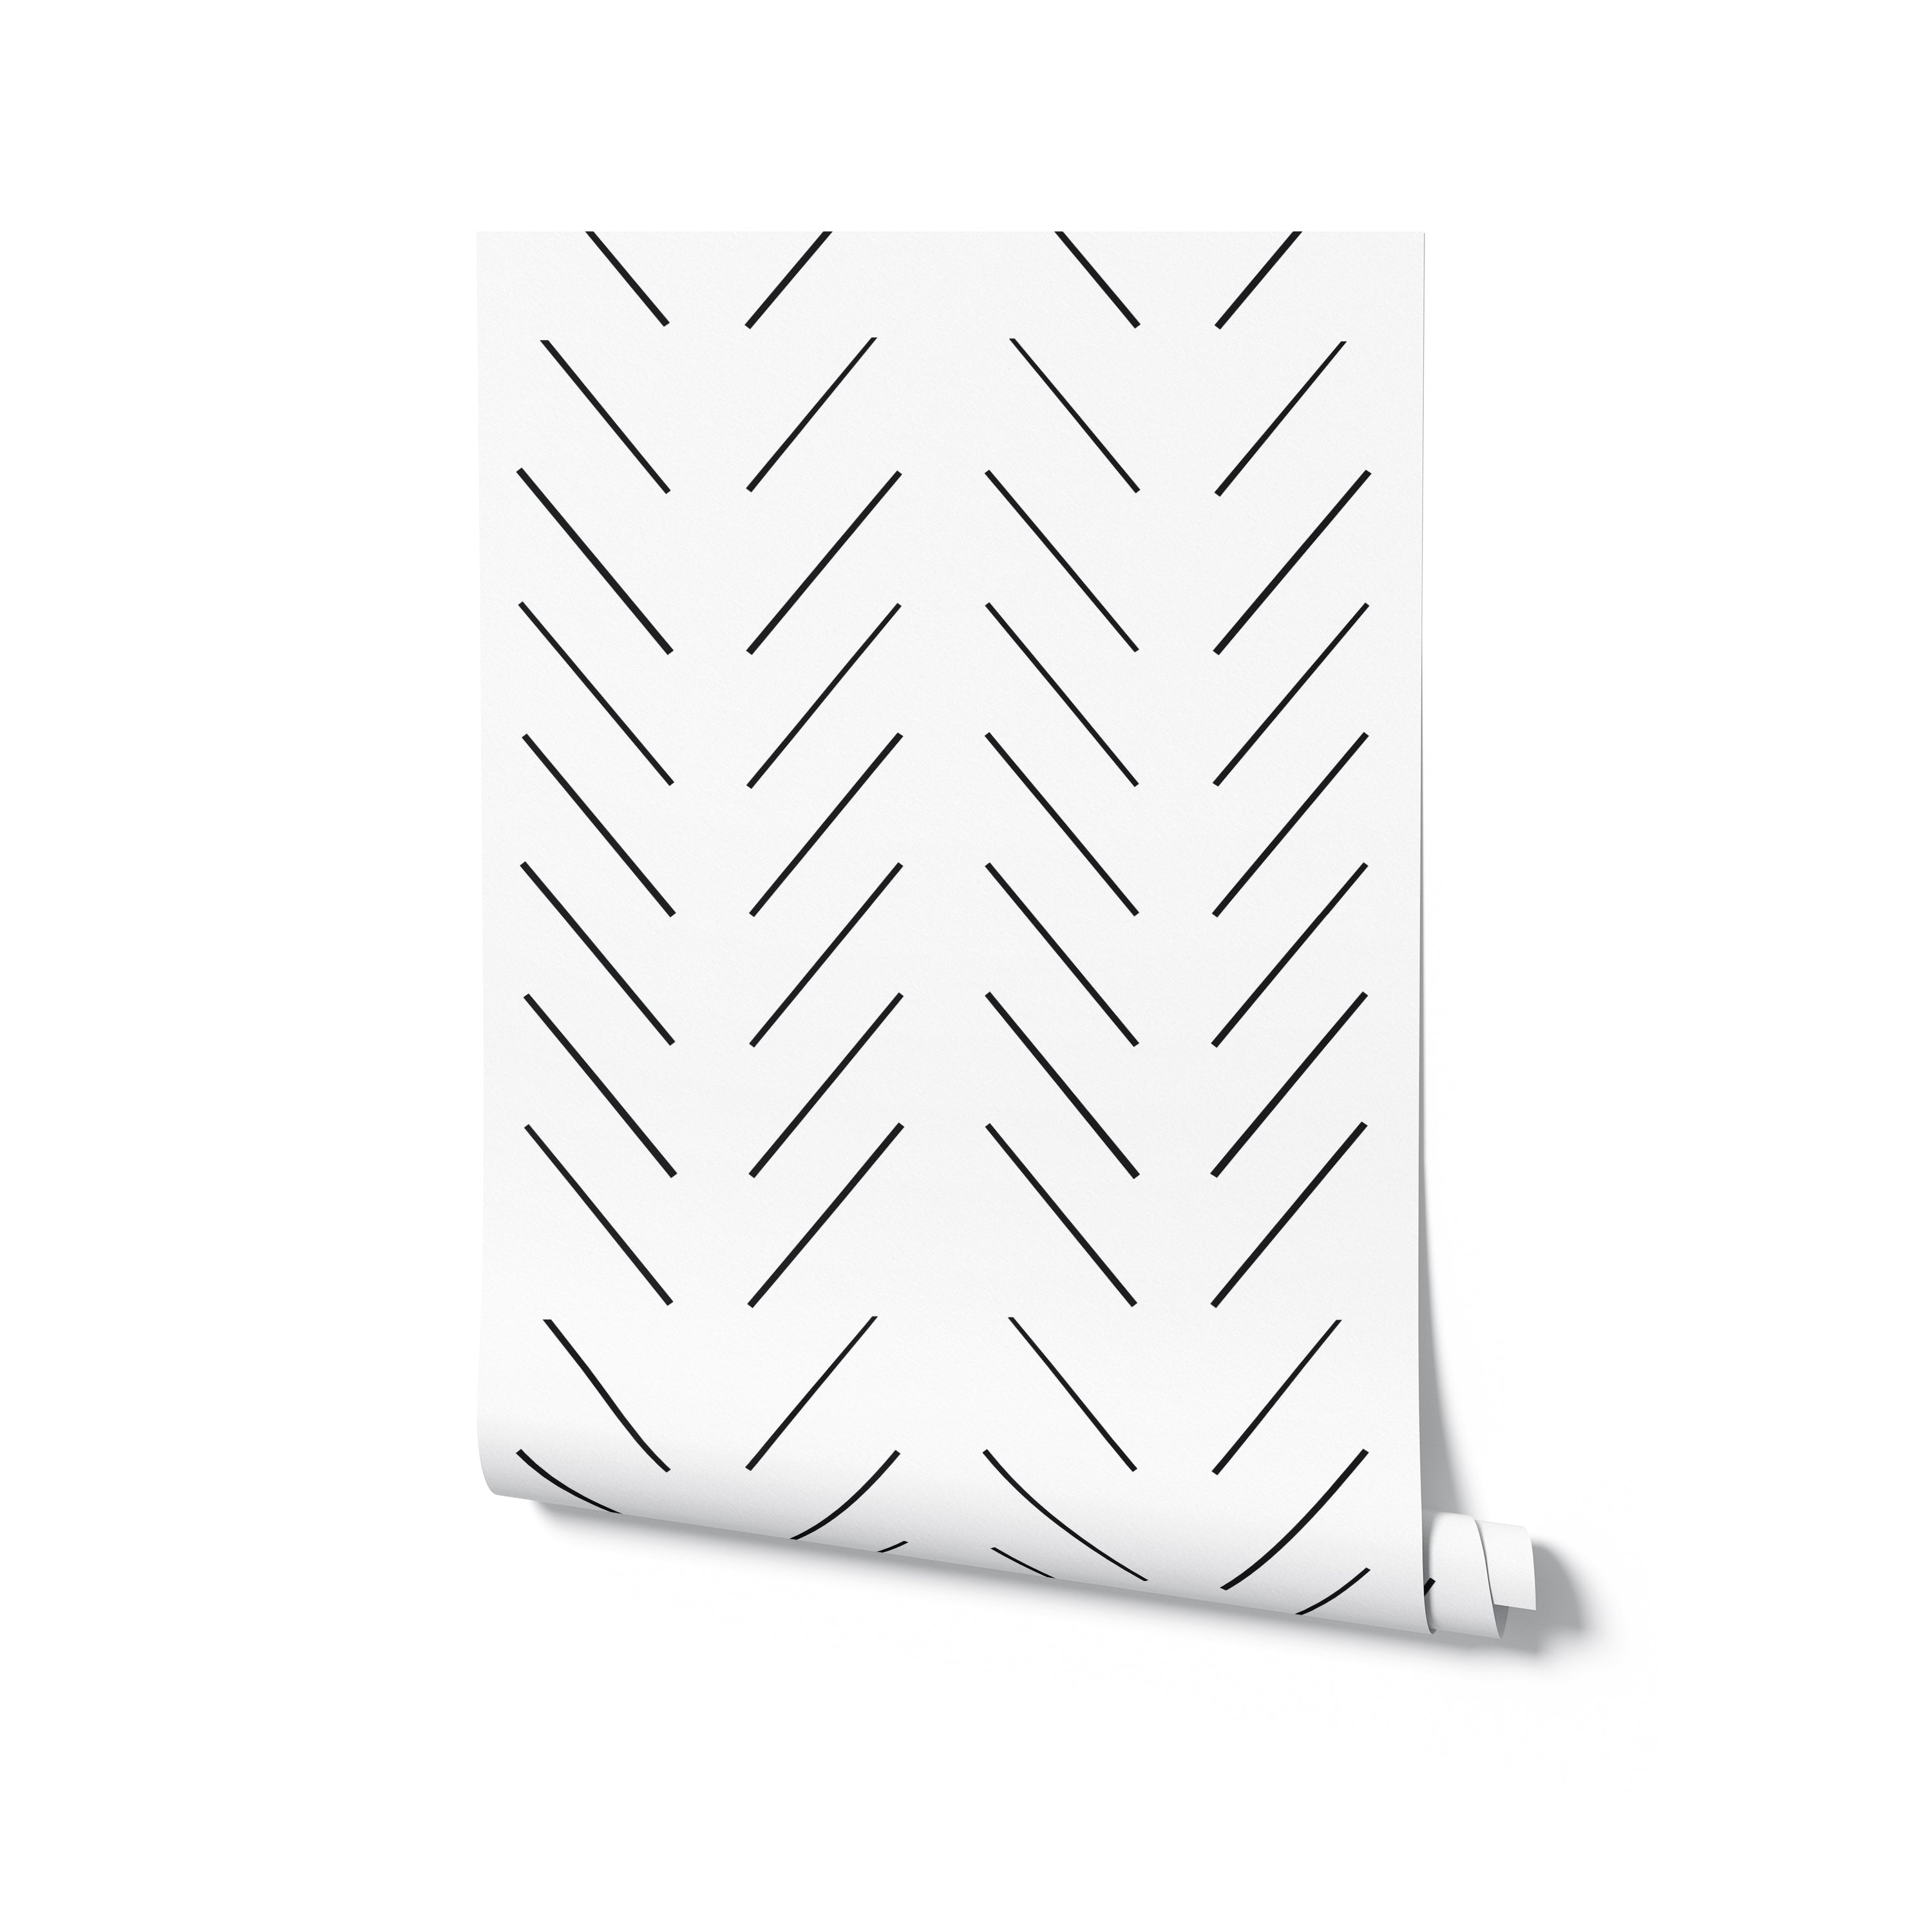 A roll of 'Minimal Line Wallpaper' presented against a white backdrop, displaying the wallpaper's contemporary design of black diagonal lines on a white surface, perfect for a minimalist decor theme.